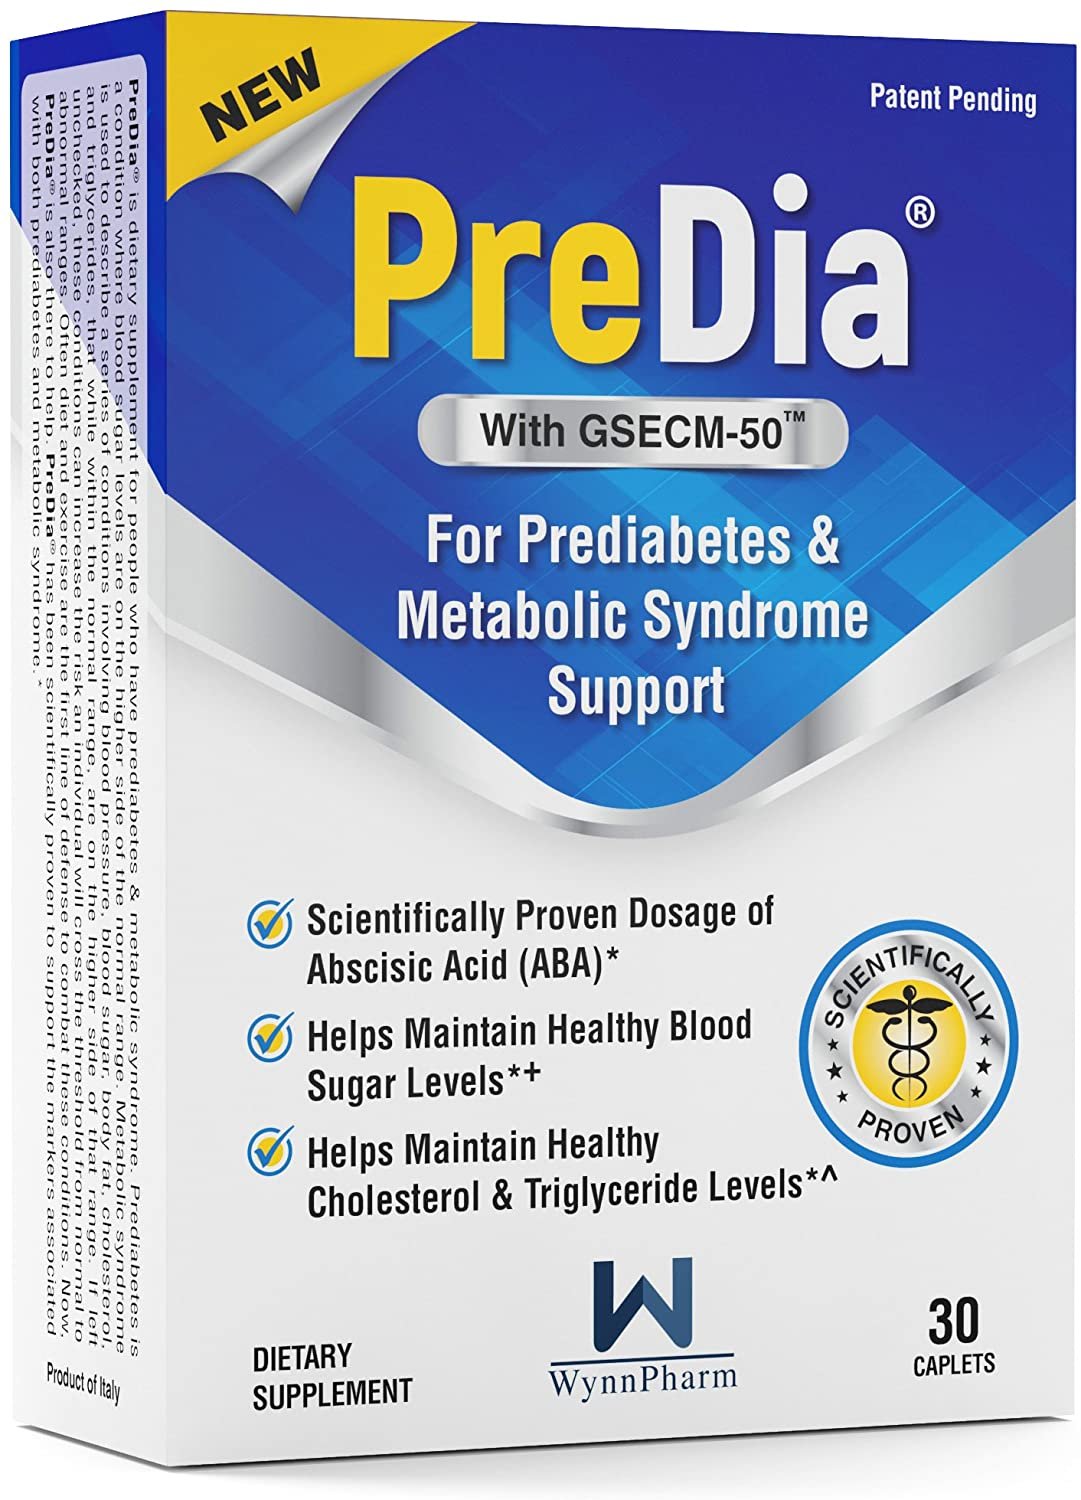 PreDia Magnesium - Chromium - Grape Seed Supplement to Help Maintain Healthy Blood Sugar, BMI, Cholesterol & Triglyceride Levels for Prediabetes & Metabolic Syndrome Support